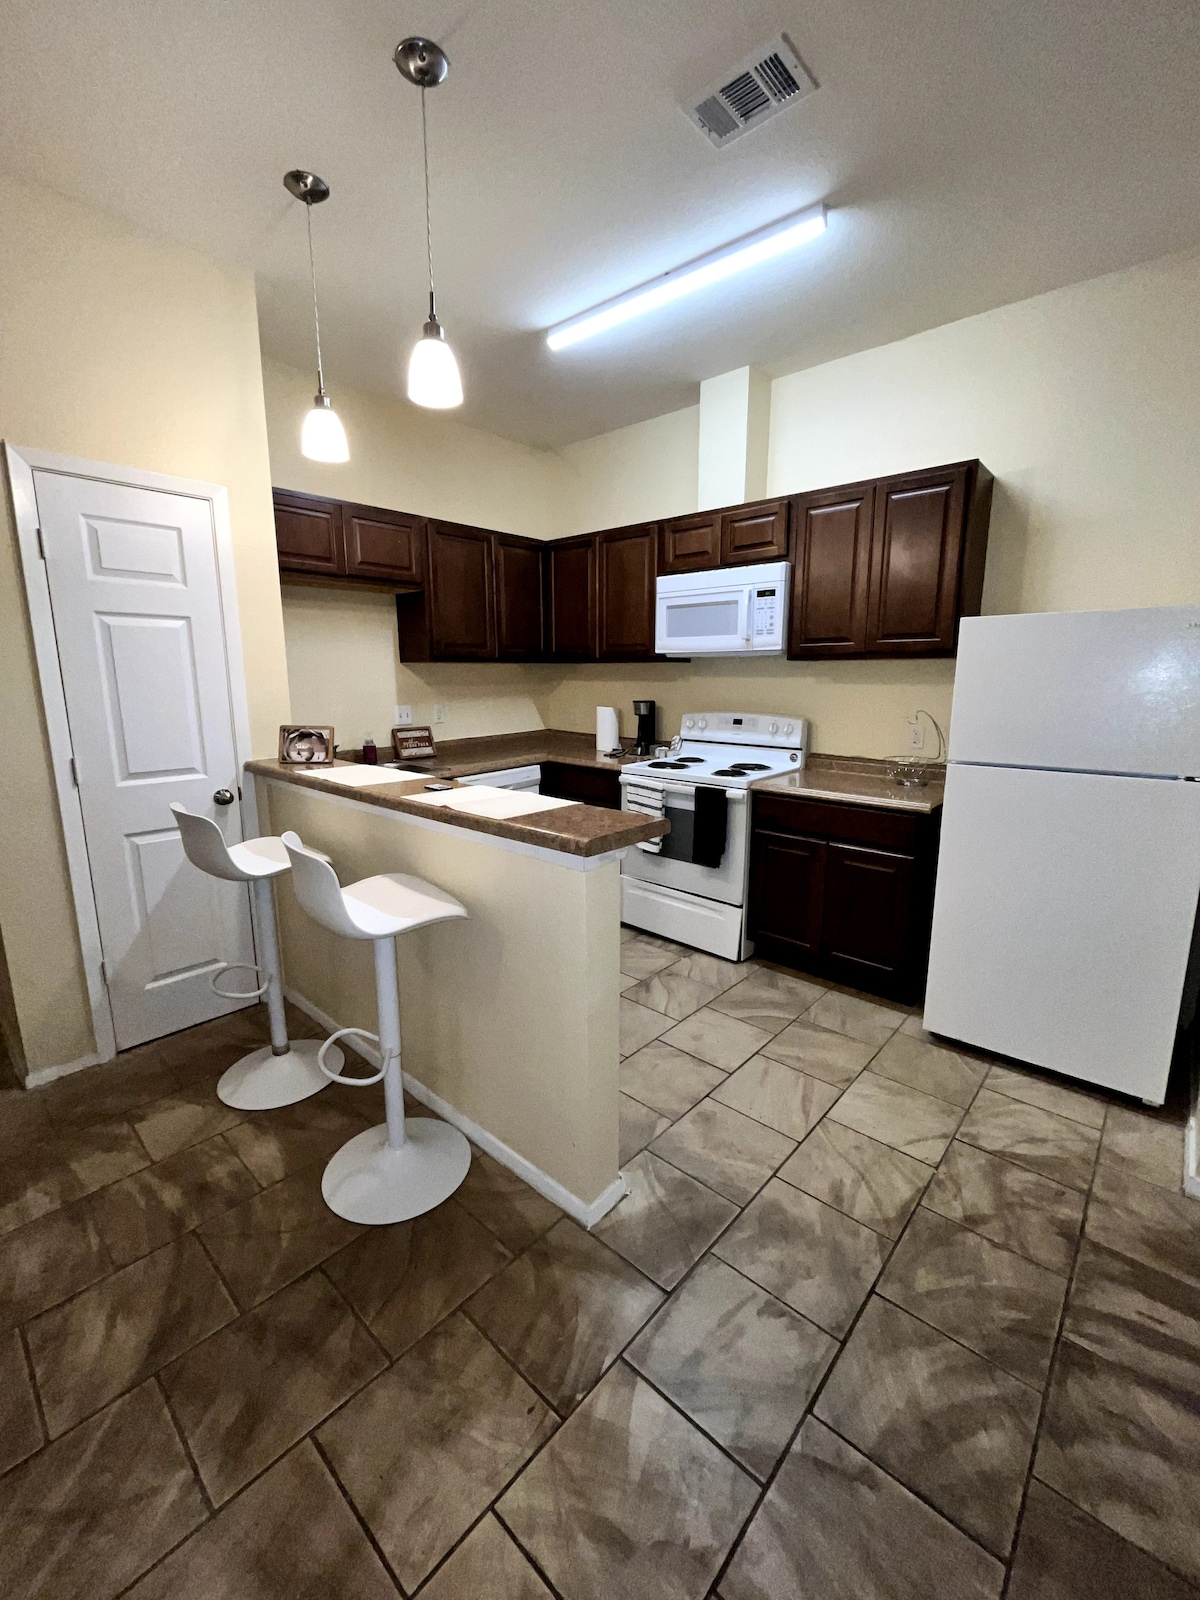 Full service one bedroom apartment downtown Austin